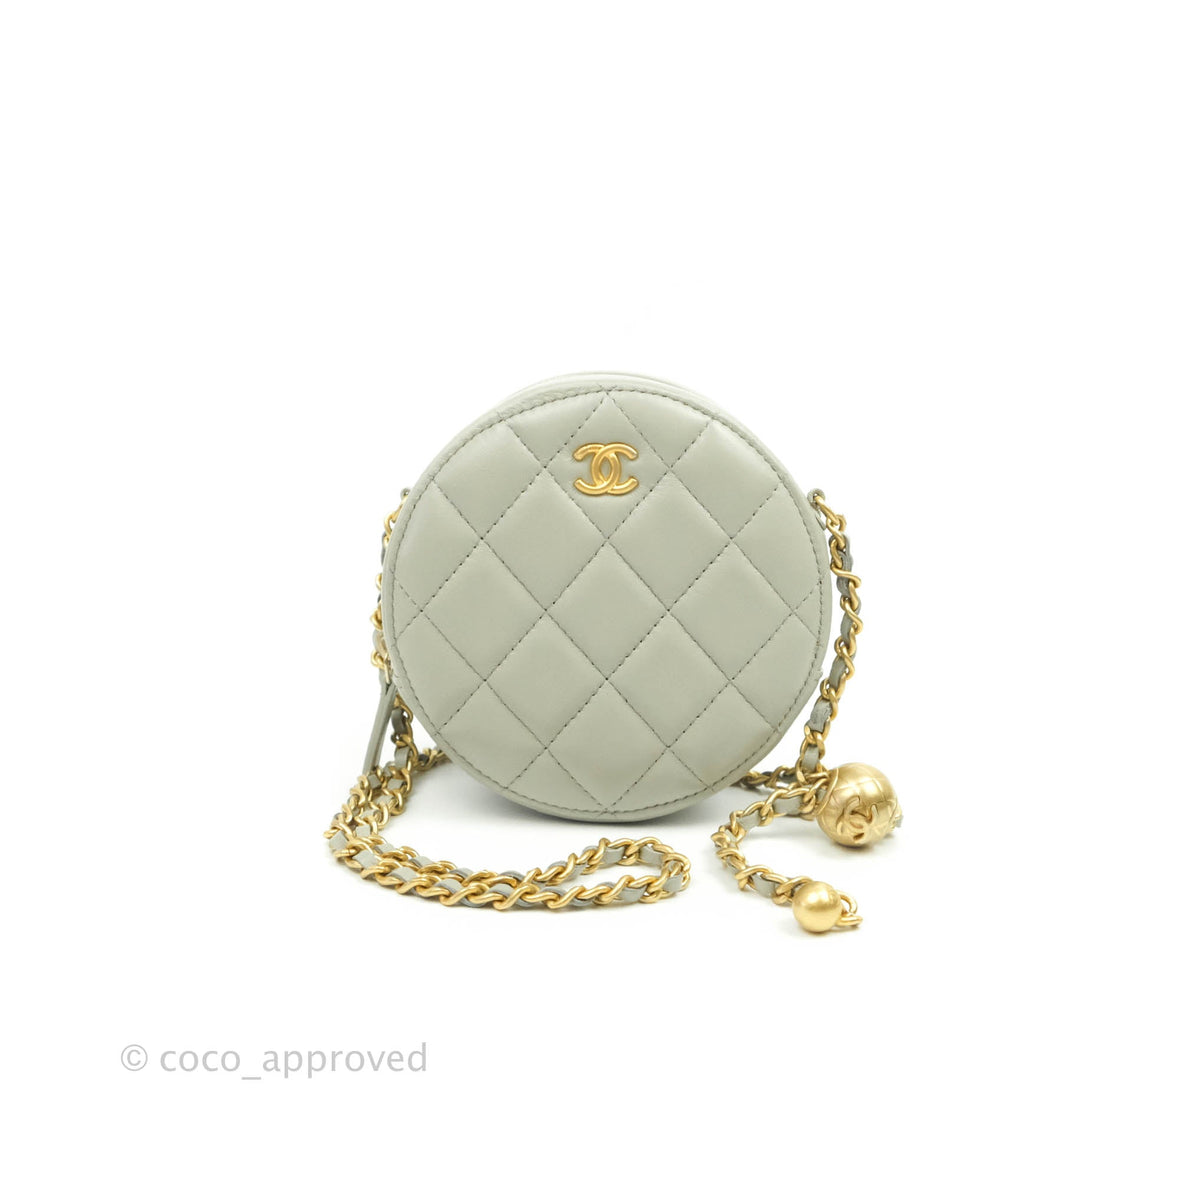 CHANEL Caviar Quilted Clutch With Chain Flap White 620442